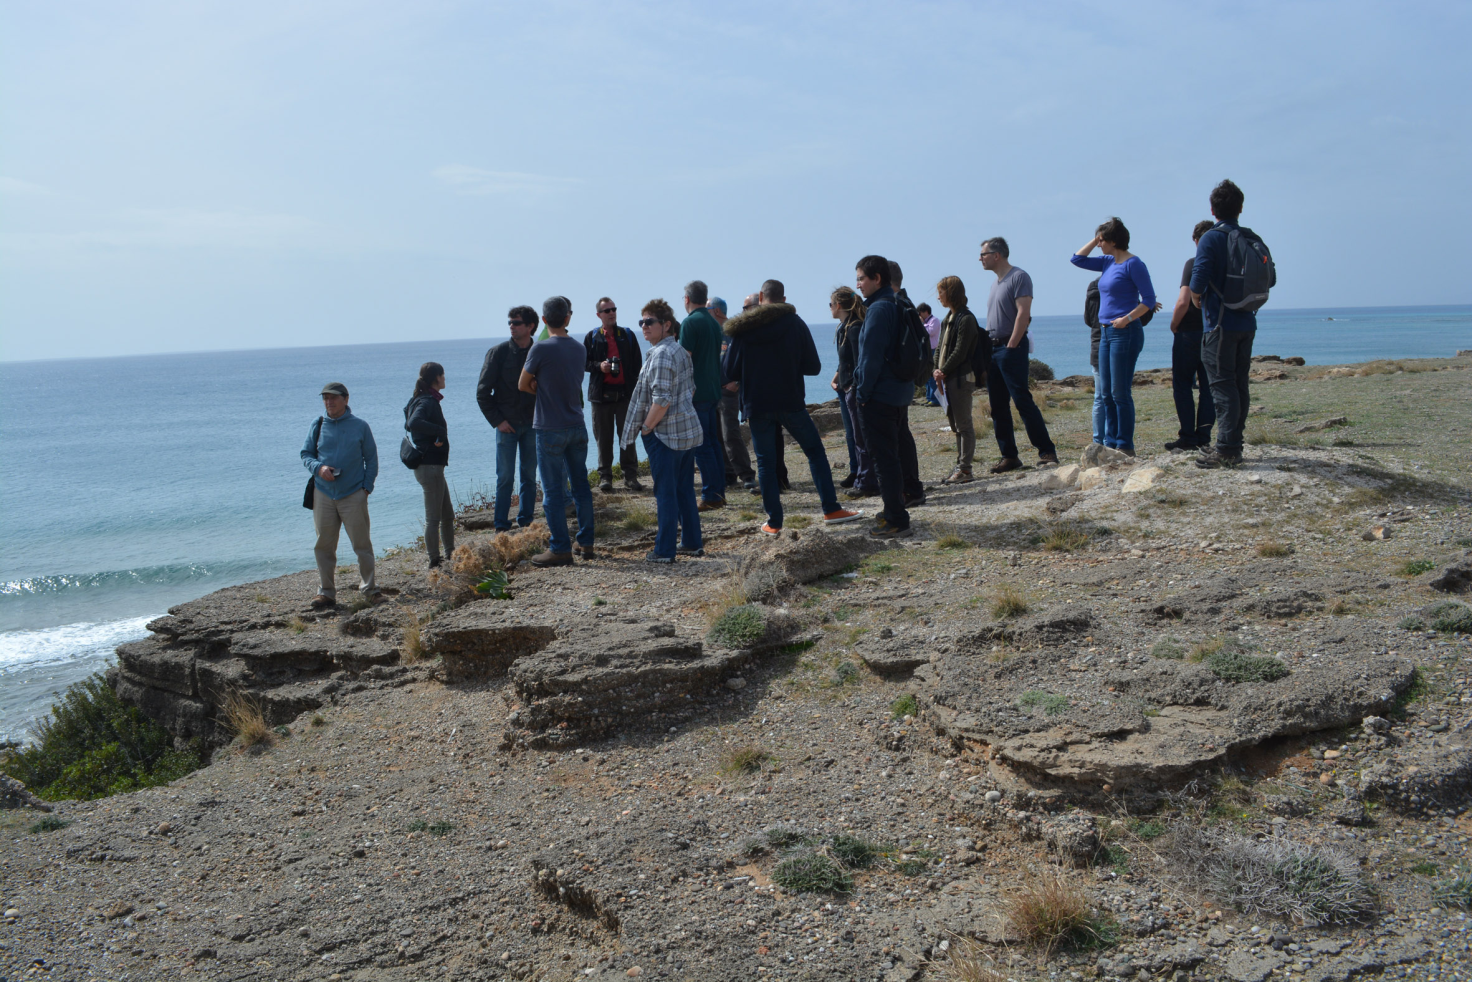 FLOWS delegates examine beach rocks on Crete’s southern shore which were uplifted by the action of past earthquakes. Photo: Adriano Mazzini